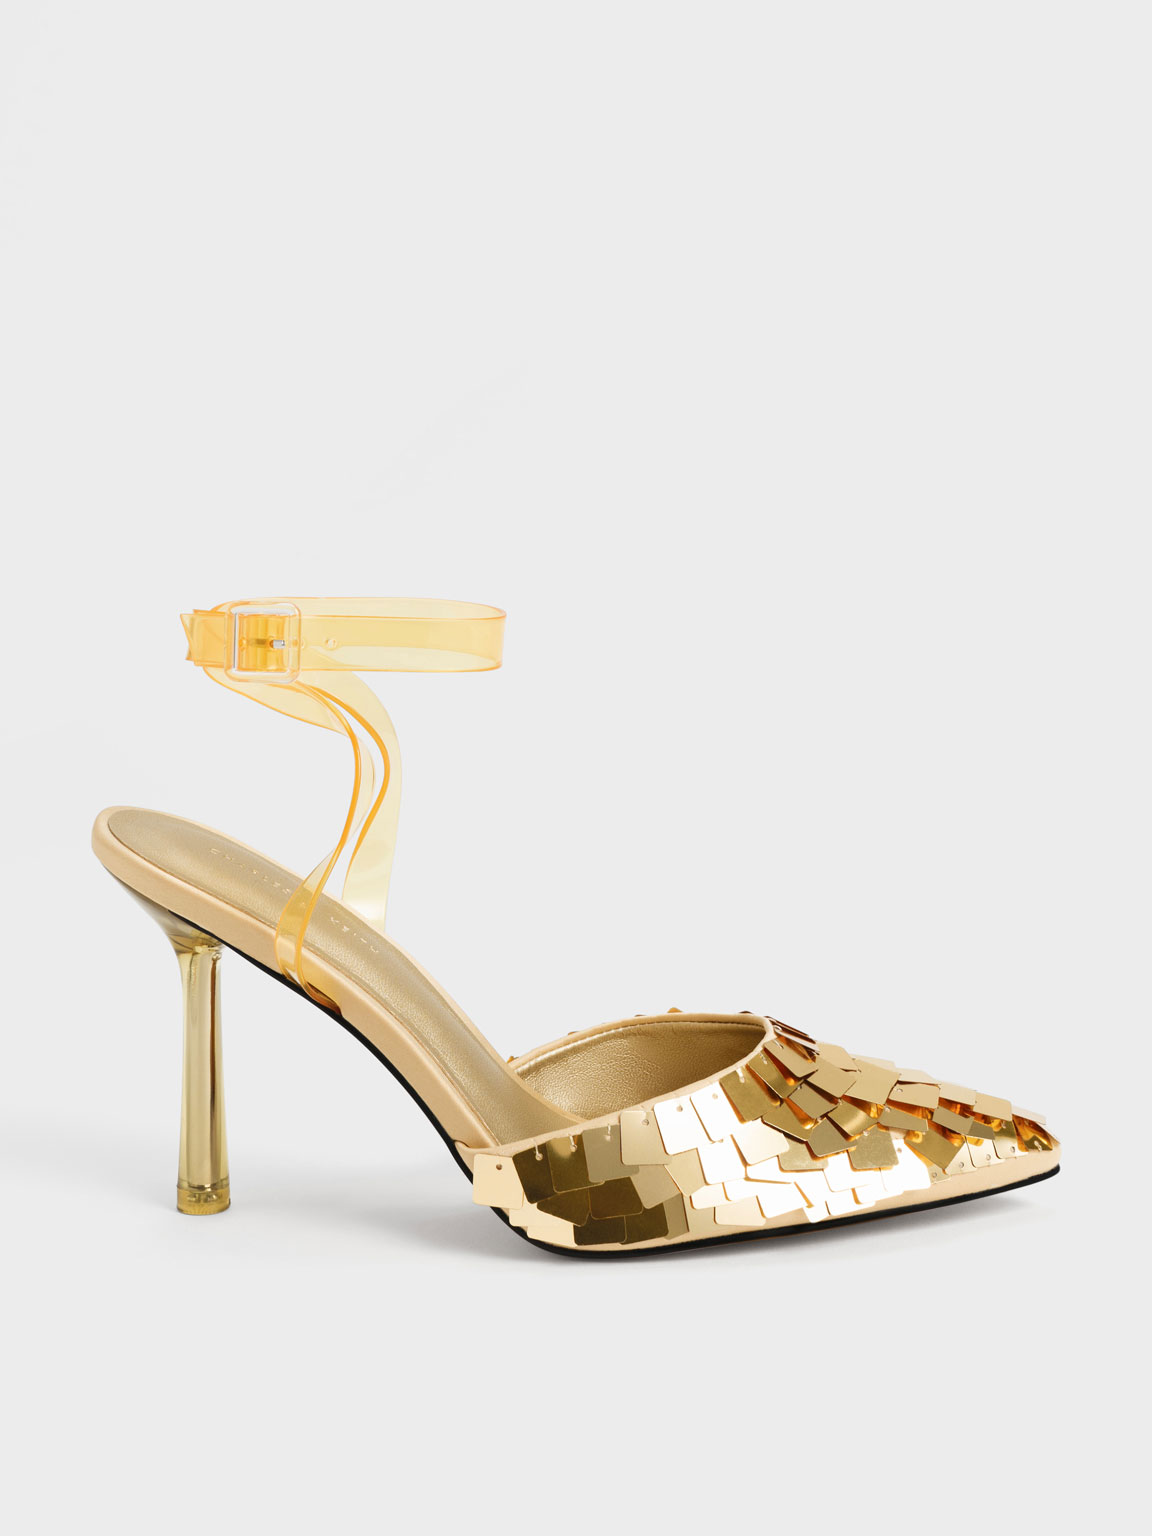 Gold Heels With Bow | ShopStyle